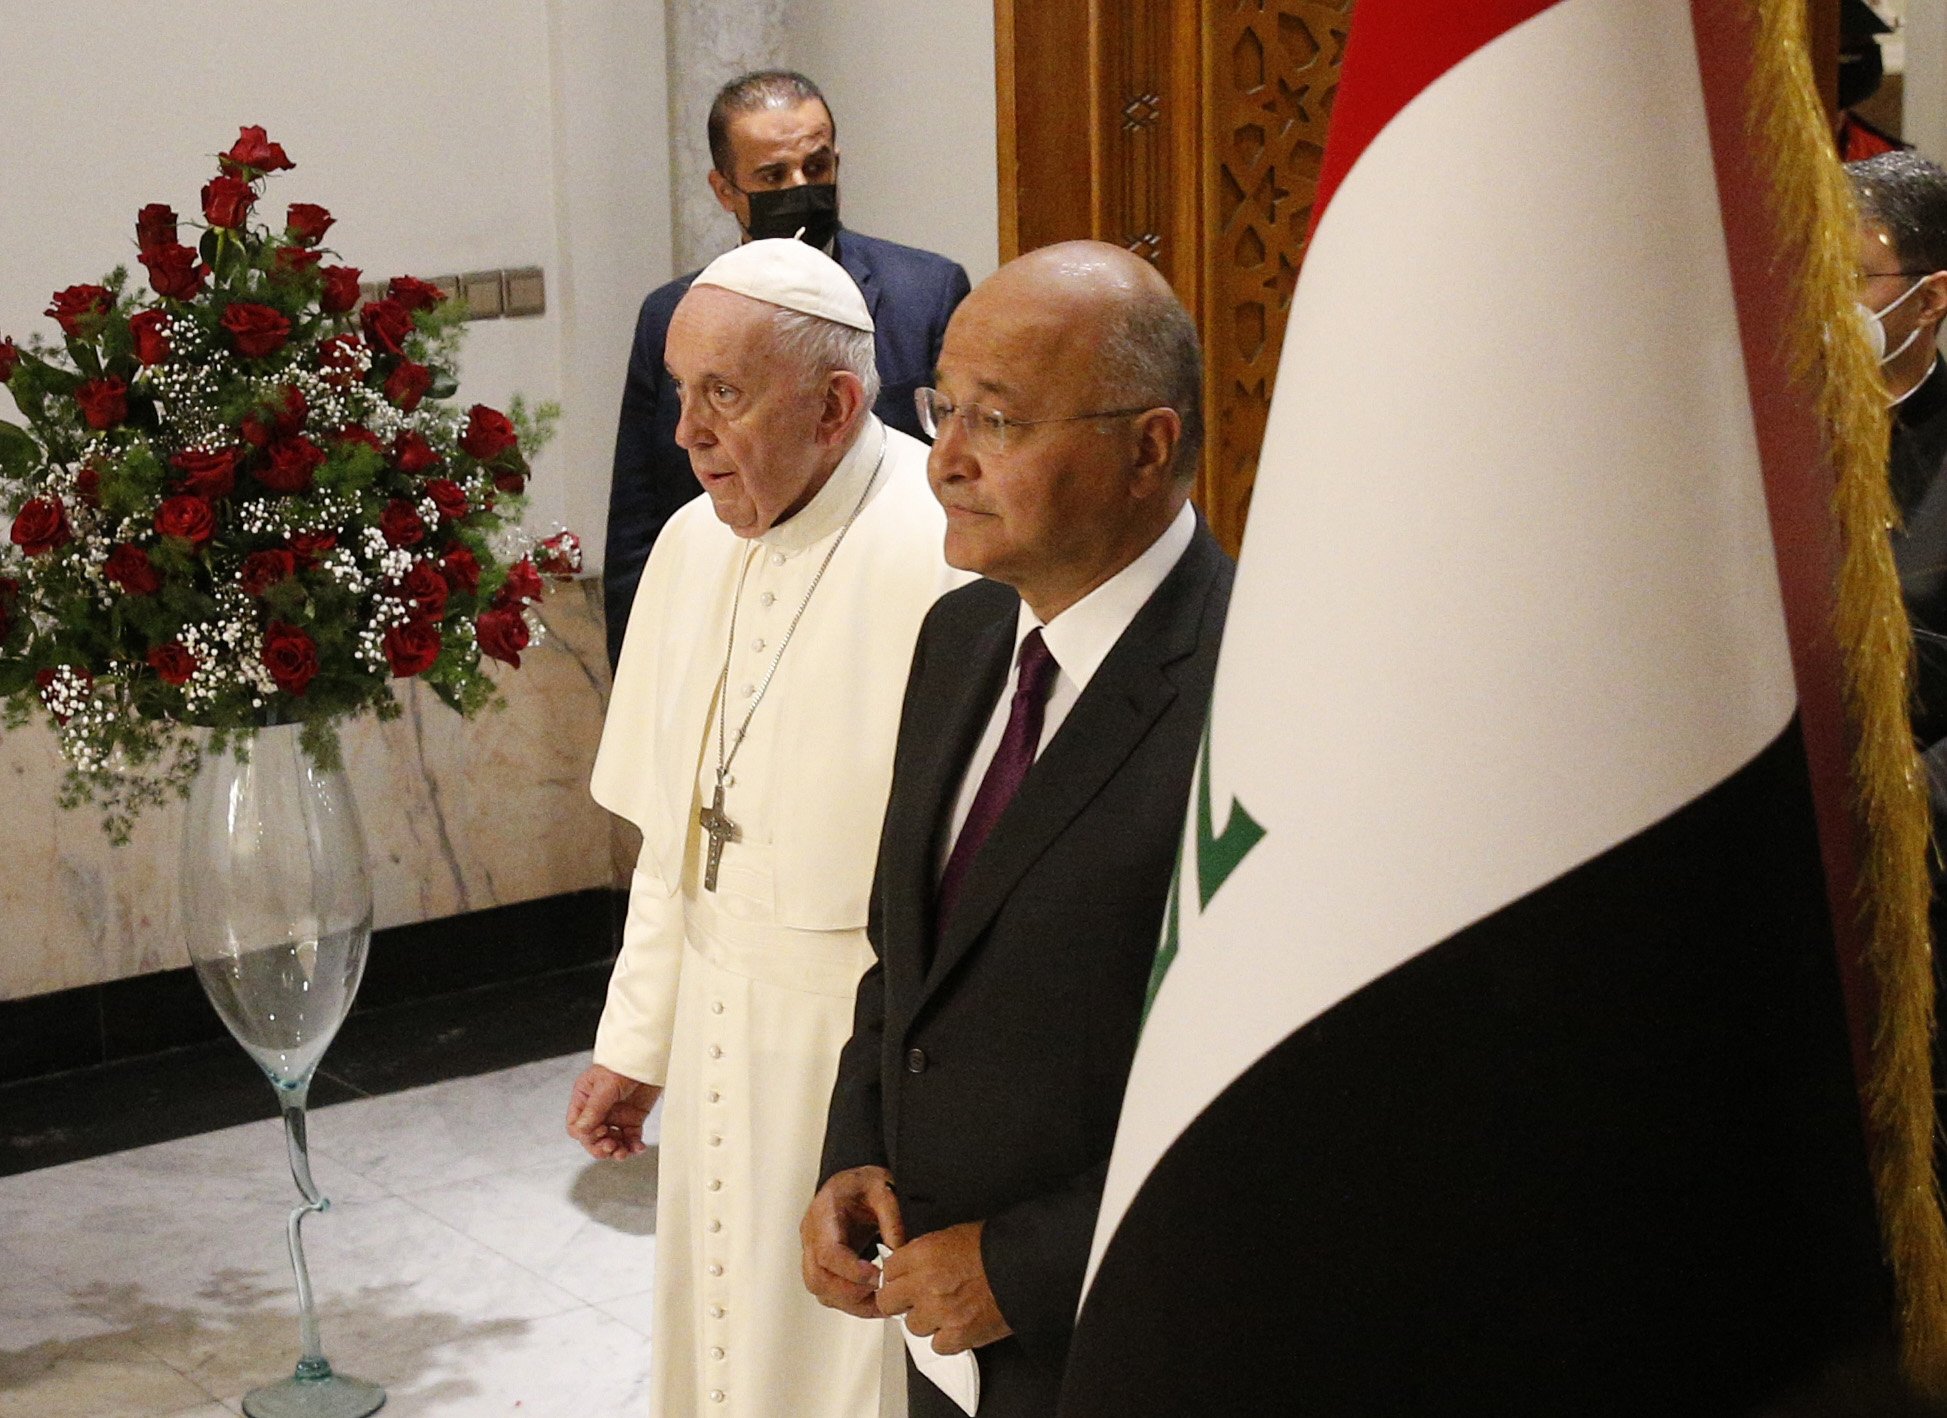 Pope arrives in Iraq promoting peace and equality